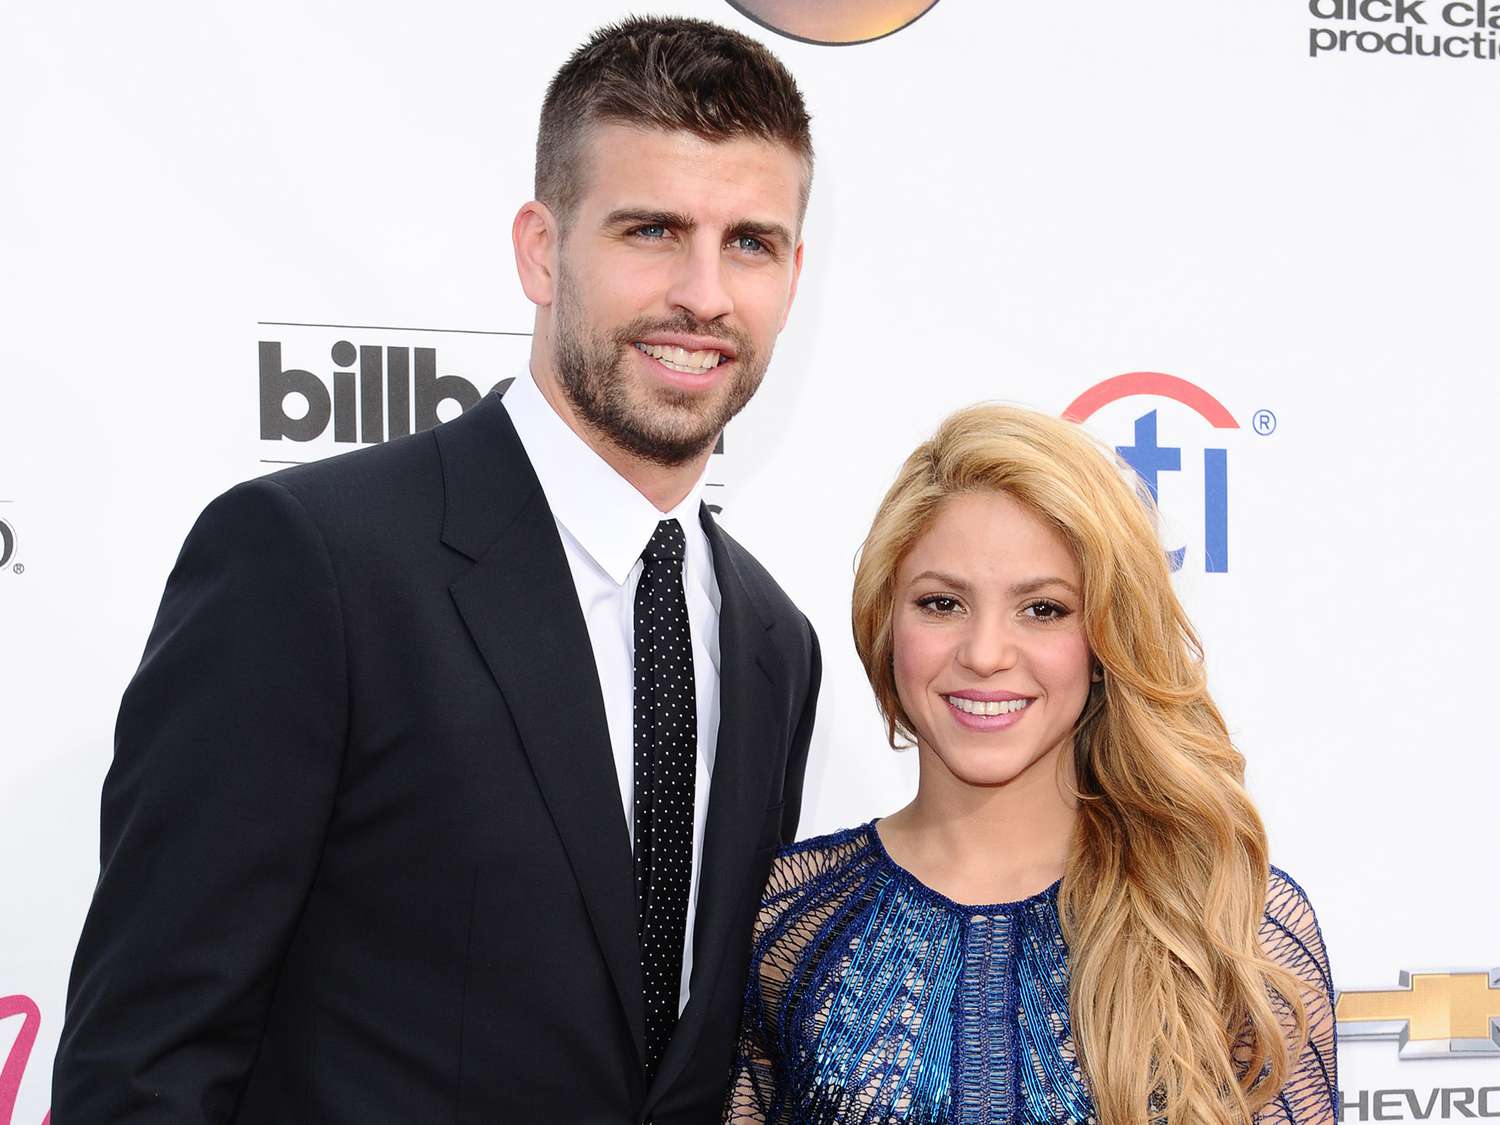 Gerard Piqué Takes A Tumble At Event, Sparking Shakira Fans’ Speculations